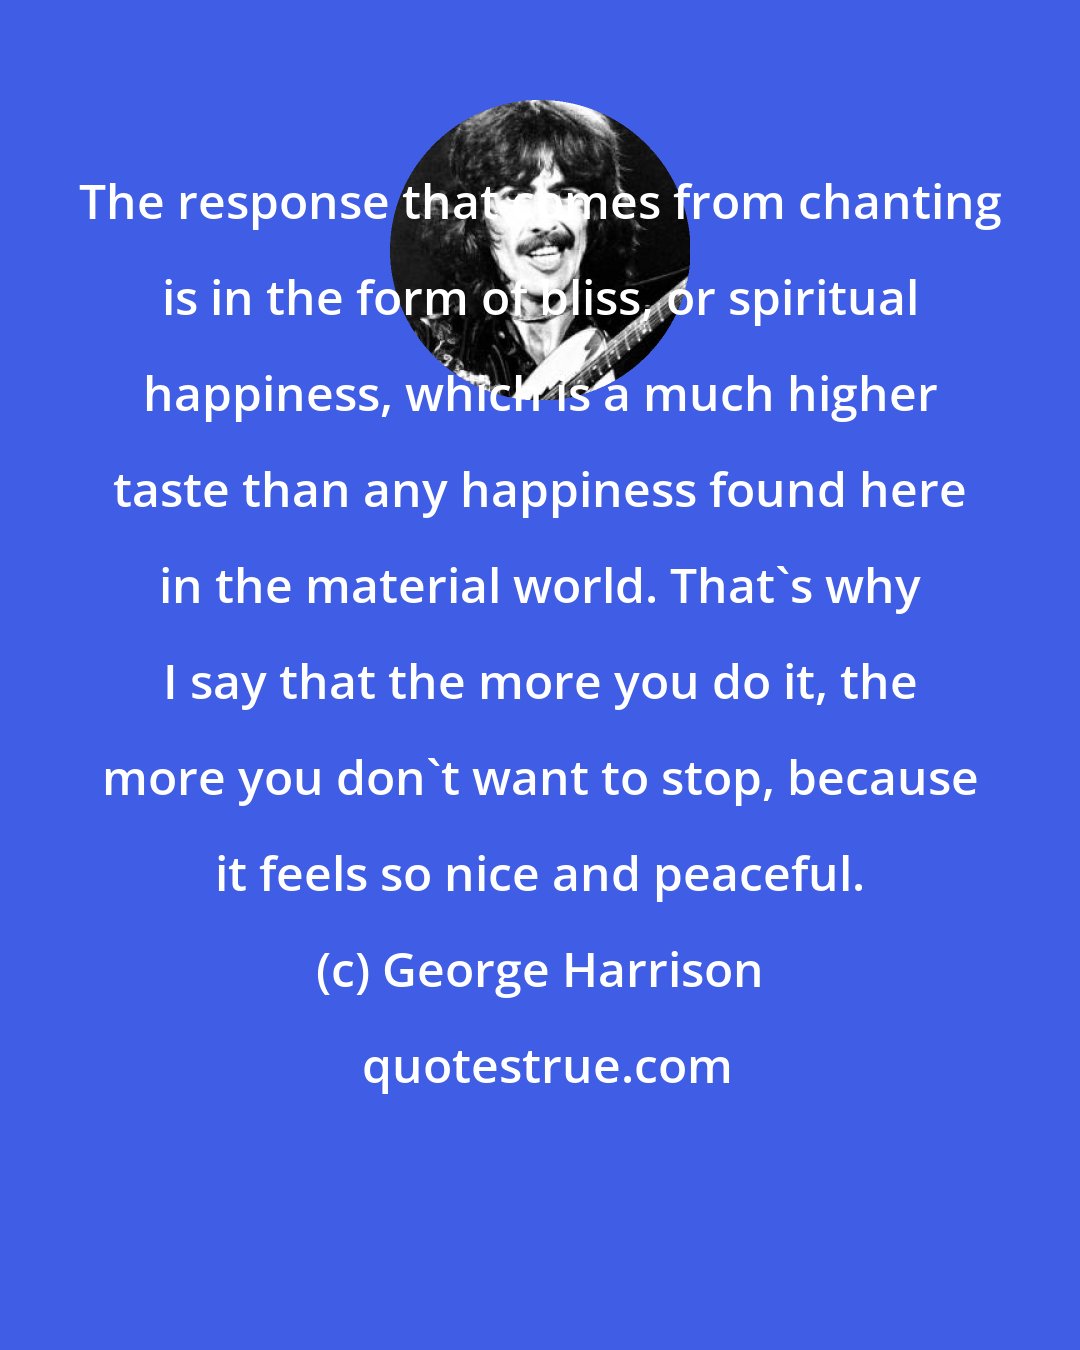 George Harrison: The response that comes from chanting is in the form of bliss, or spiritual happiness, which is a much higher taste than any happiness found here in the material world. That's why I say that the more you do it, the more you don't want to stop, because it feels so nice and peaceful.